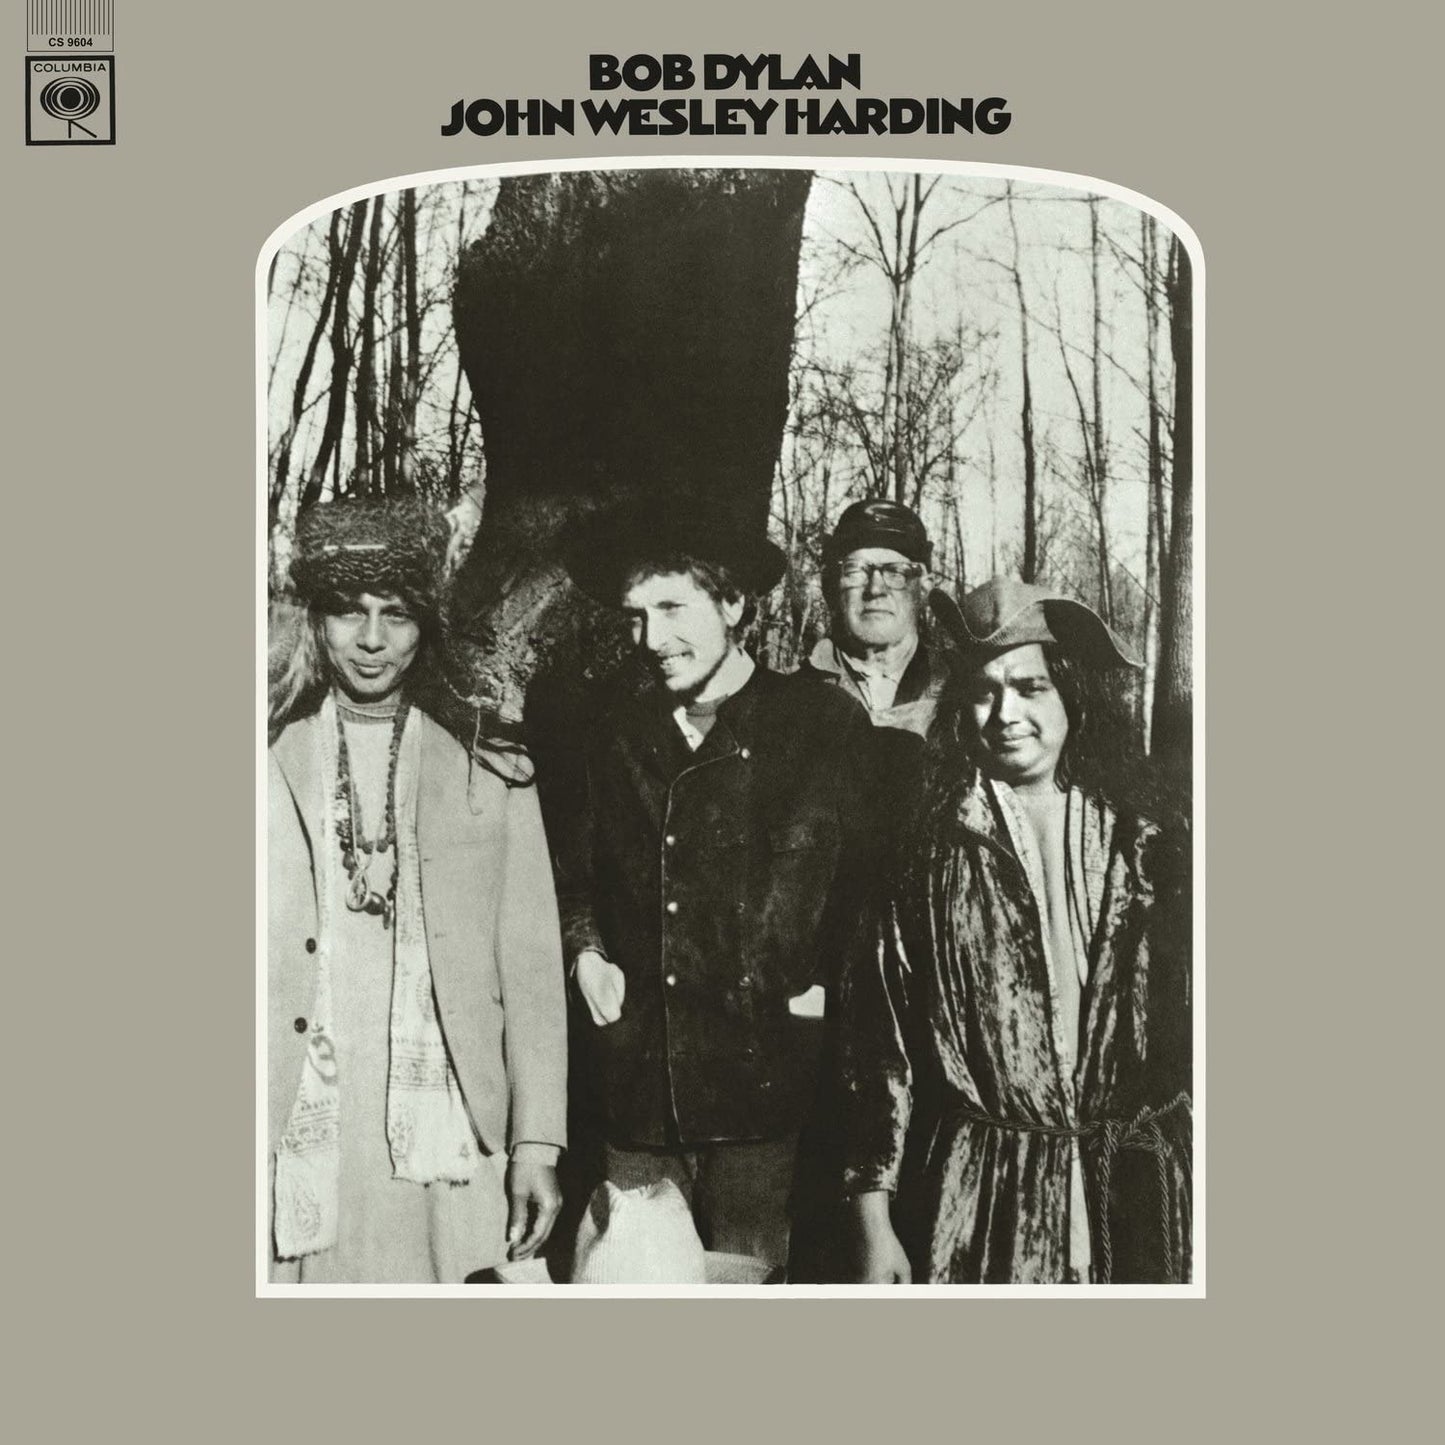 John Wesley Harding is the eighth studio album on Vinyl from Bob Dylan, originally released on December 27, 1967 by Columbia Records.